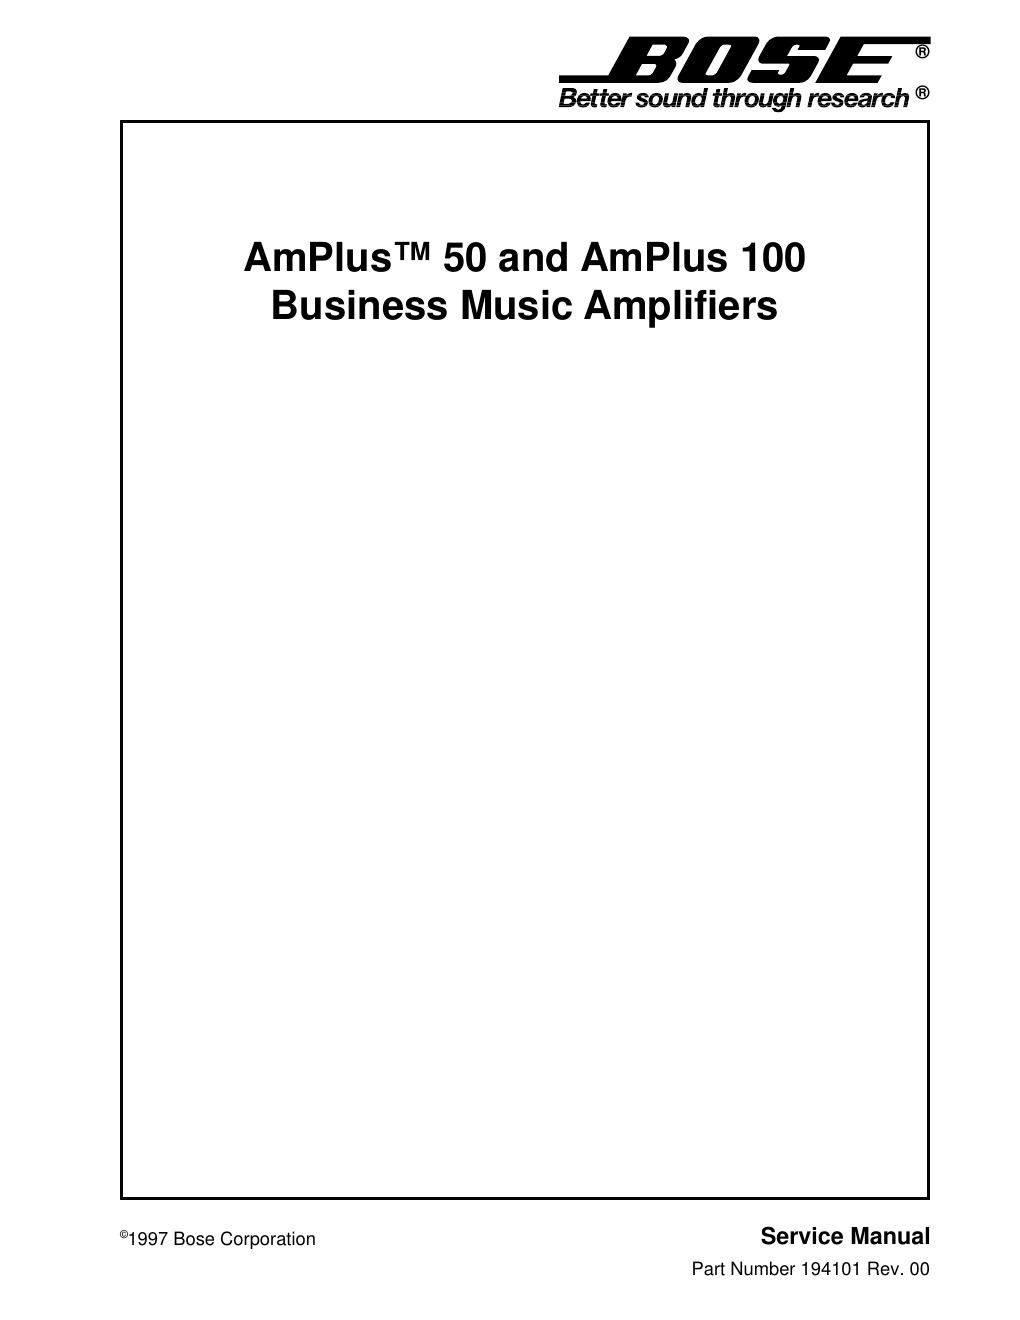 bose amplus 50 and 100 business music amplifiers manual